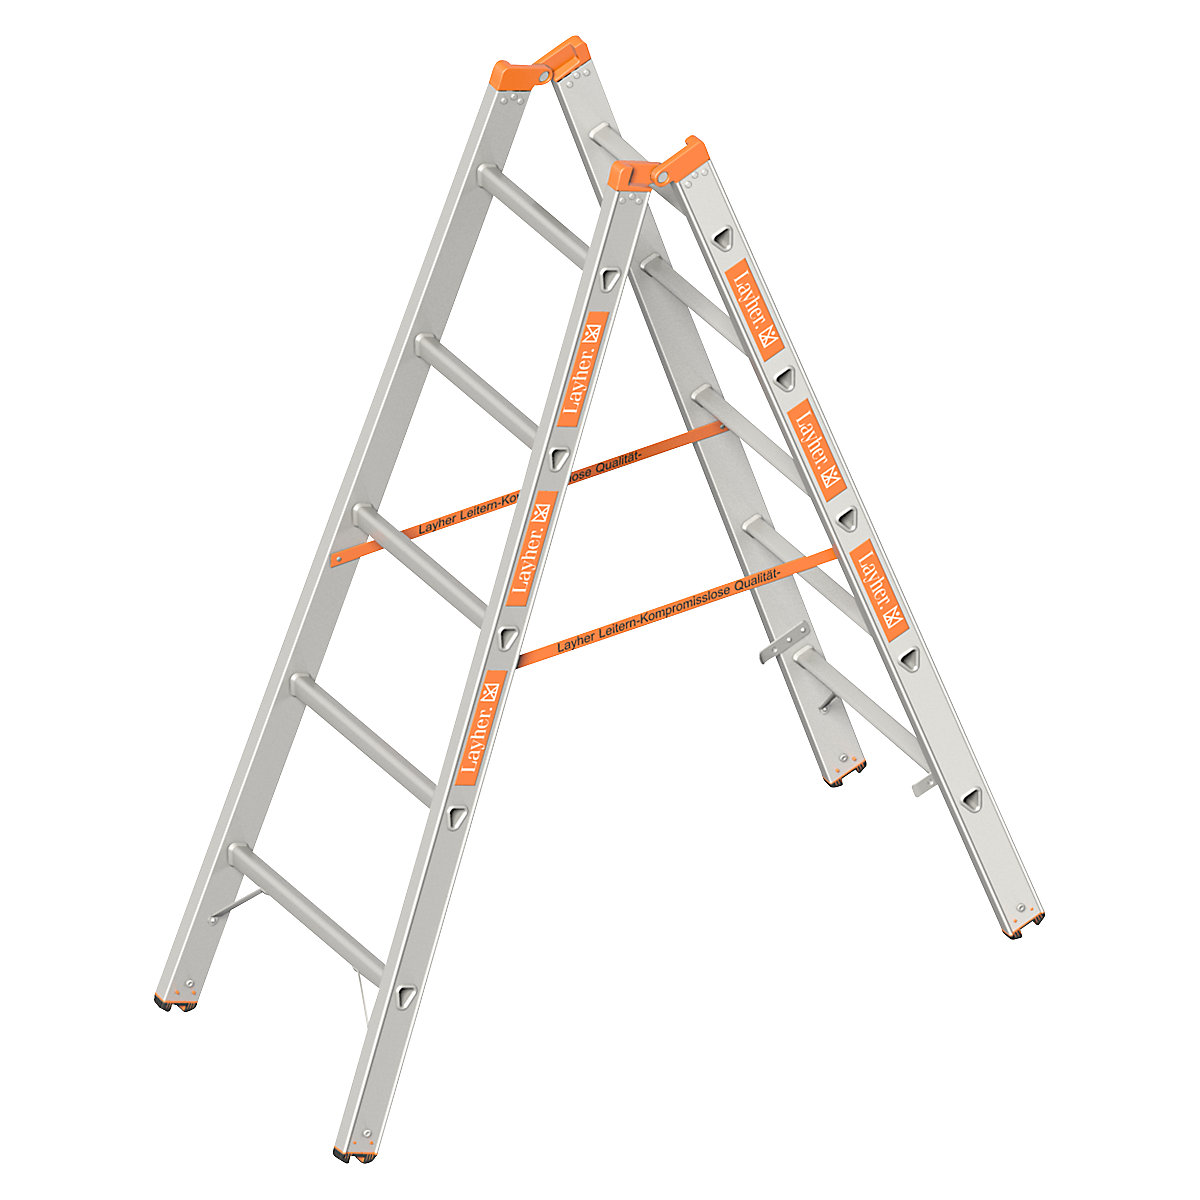 Double sided rung ladder – Layher, double sided access, 2 x 5 rungs-8